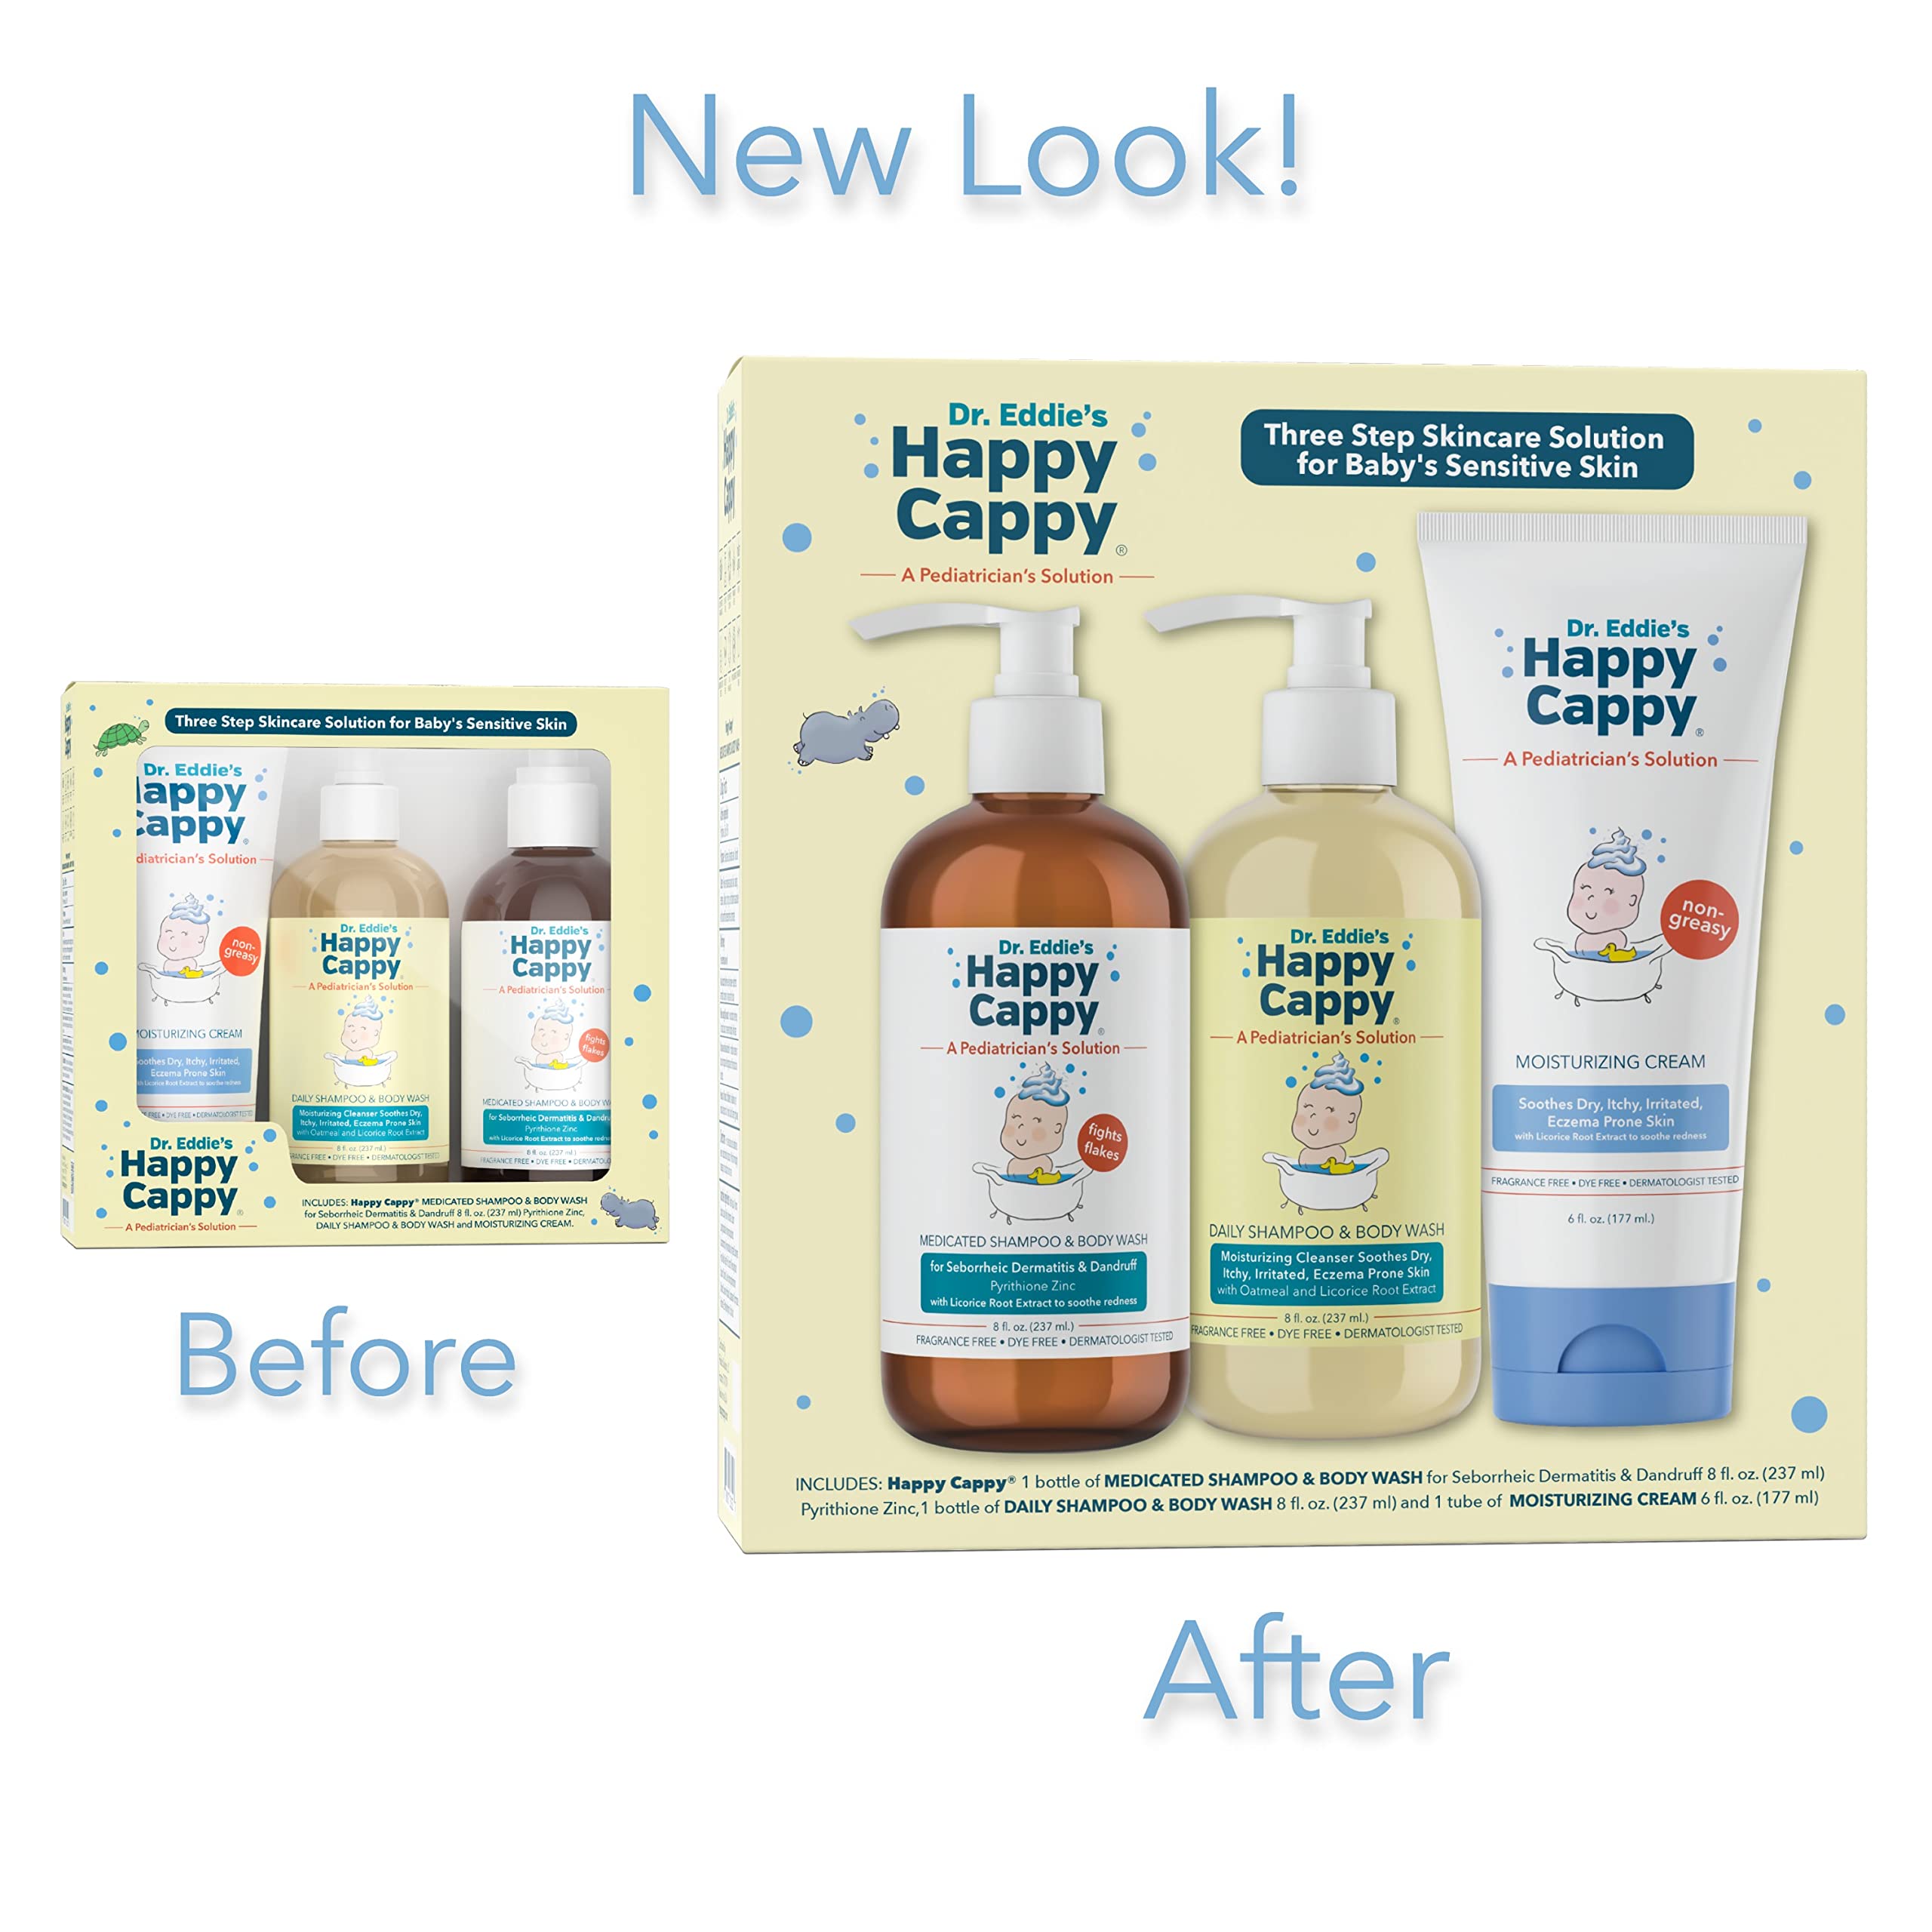 Happy Cappy Dr. Eddie's 3 Step Skincare Solution for Baby's Sensitive Skin | for Cradle Cap, Seborrheic Dermatitis, Dandruff, Dry, Itchy, Irritated, Eczema Prone Skin, Gift Box Set, 3 Pieces